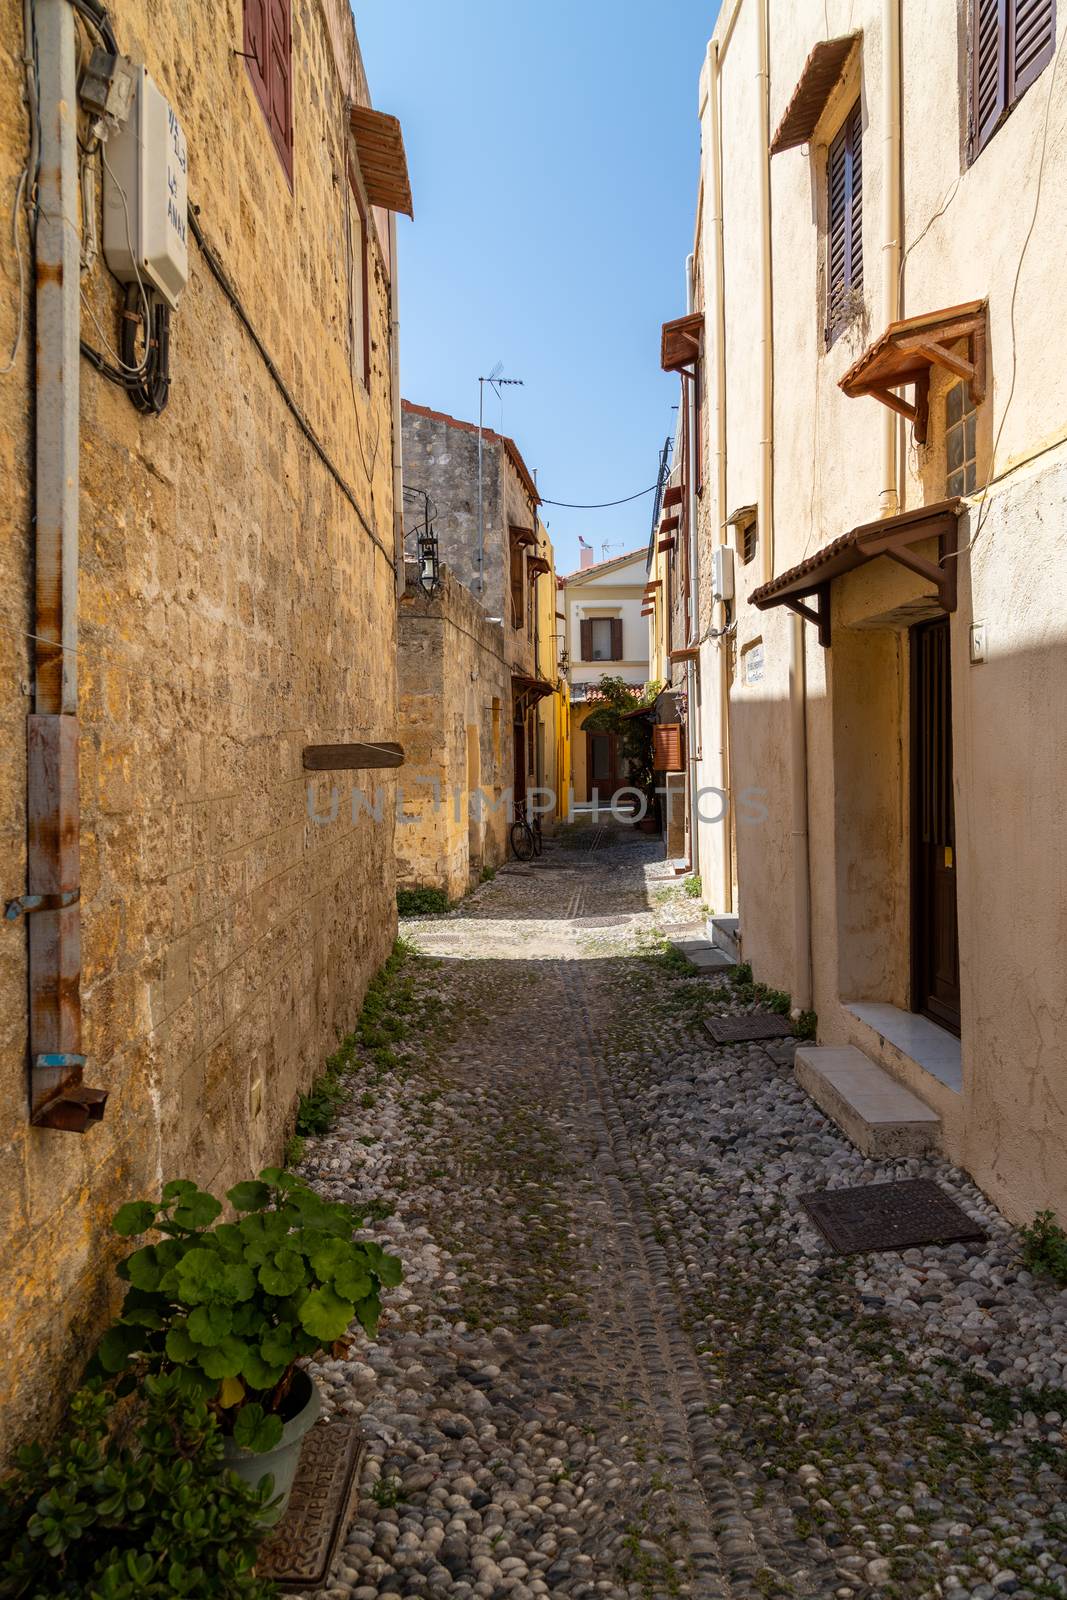 Narrow alley / lane in the old town of Rhodes city  by reinerc